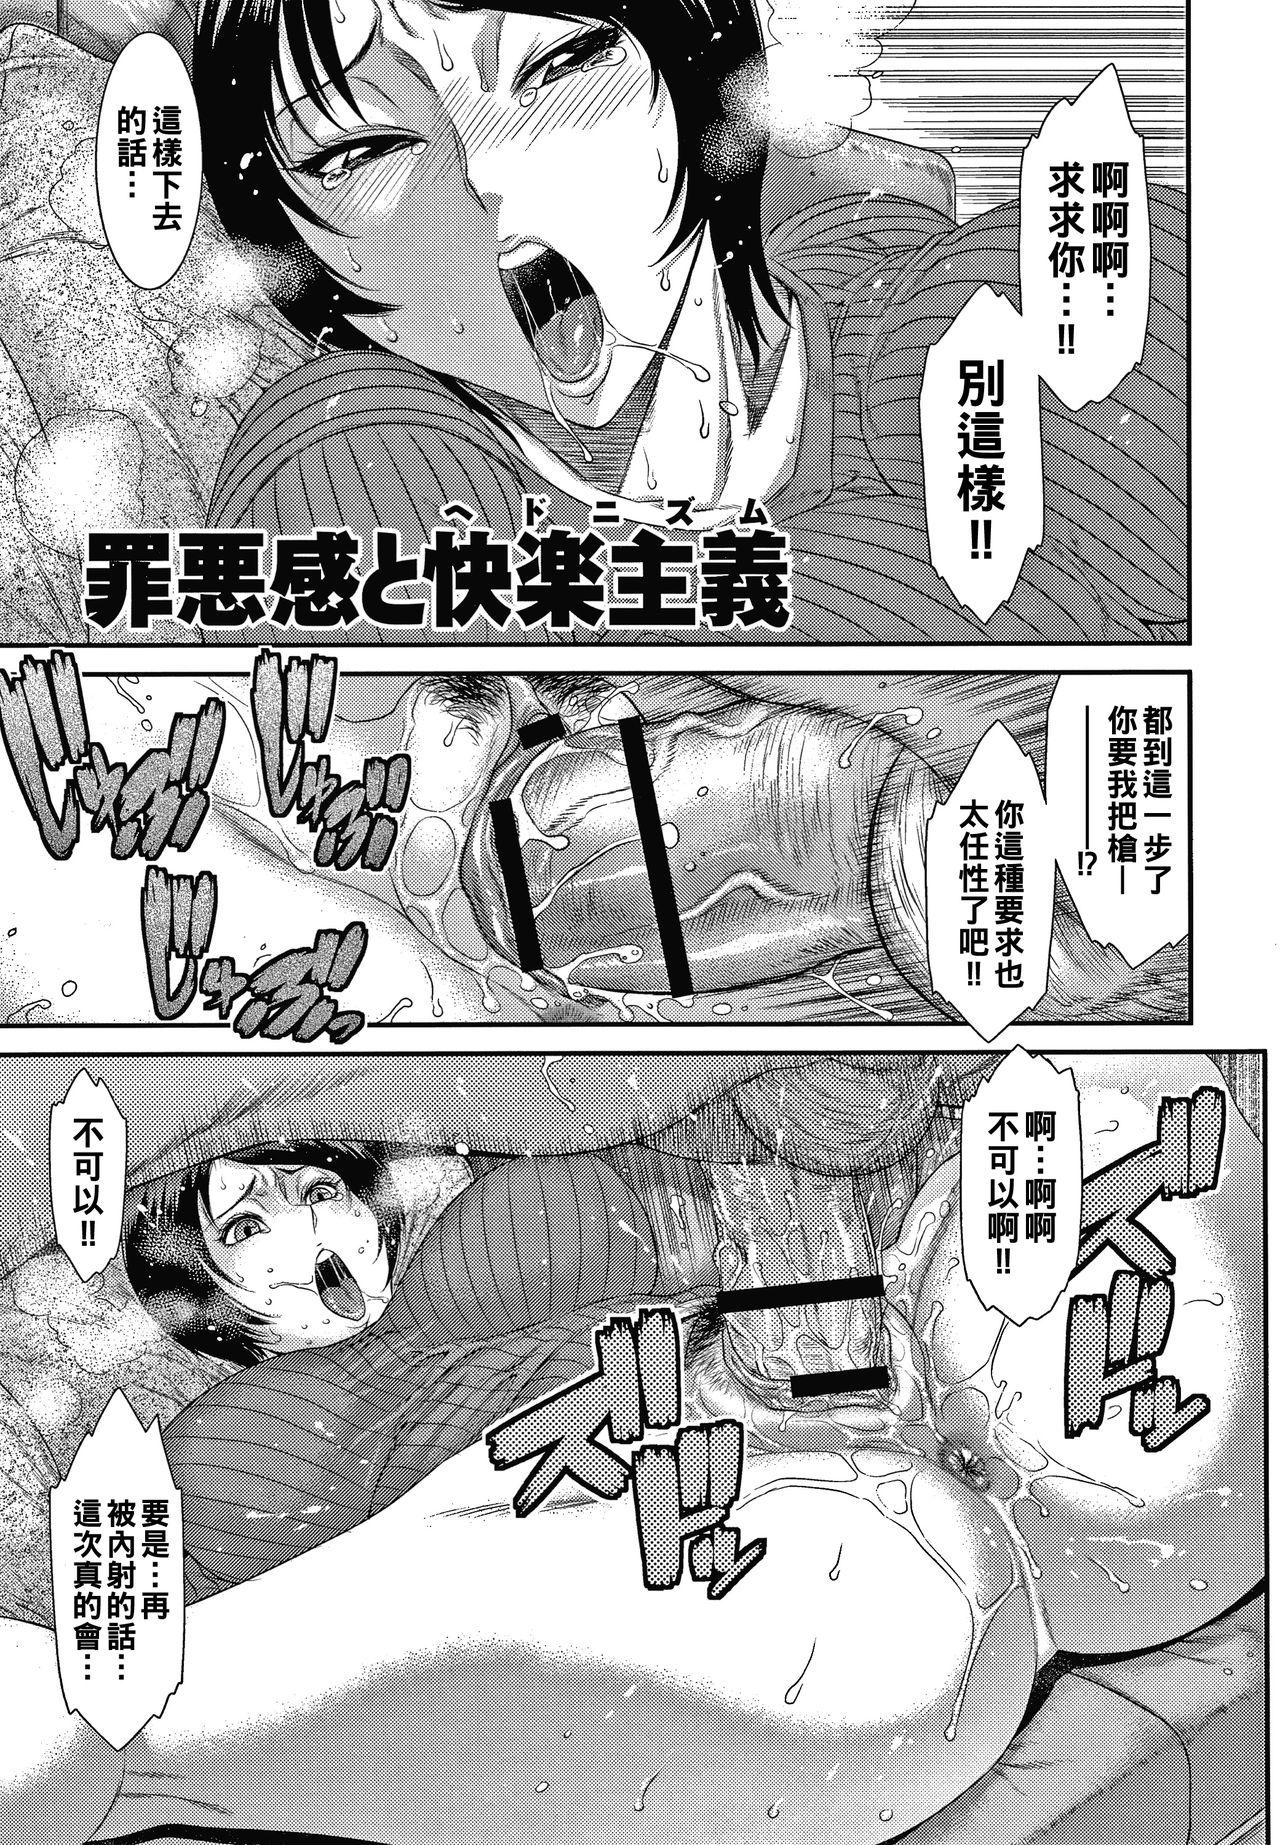 Virgin 罪悪感と快楽主義（Chinese） Cut - Page 1